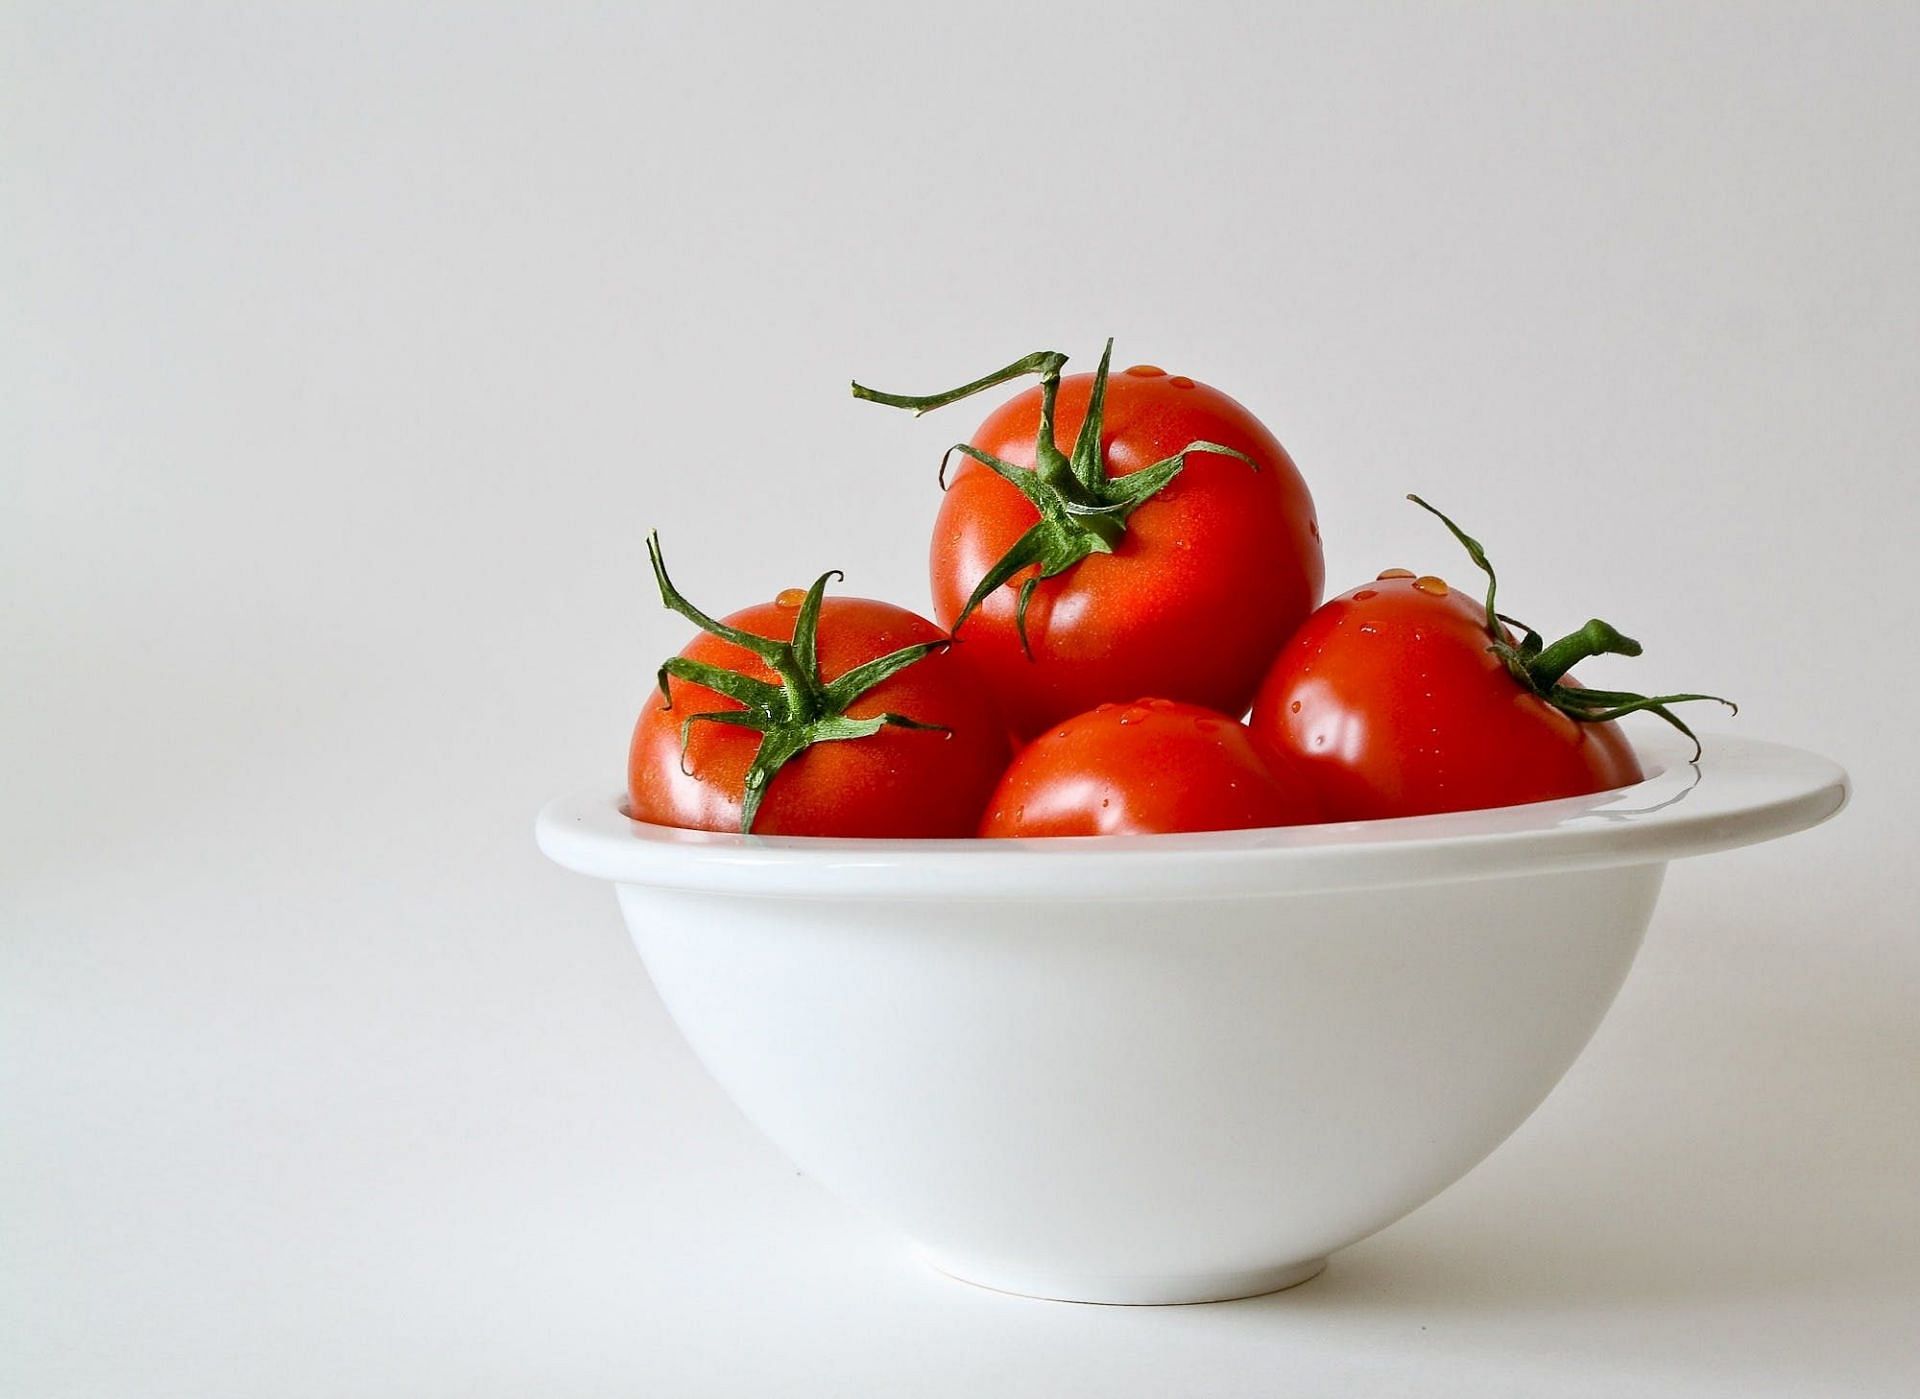 Importance of knowing health benefits of heirloom tomatoes (image sourced via Pexels / Photo by pixabay)